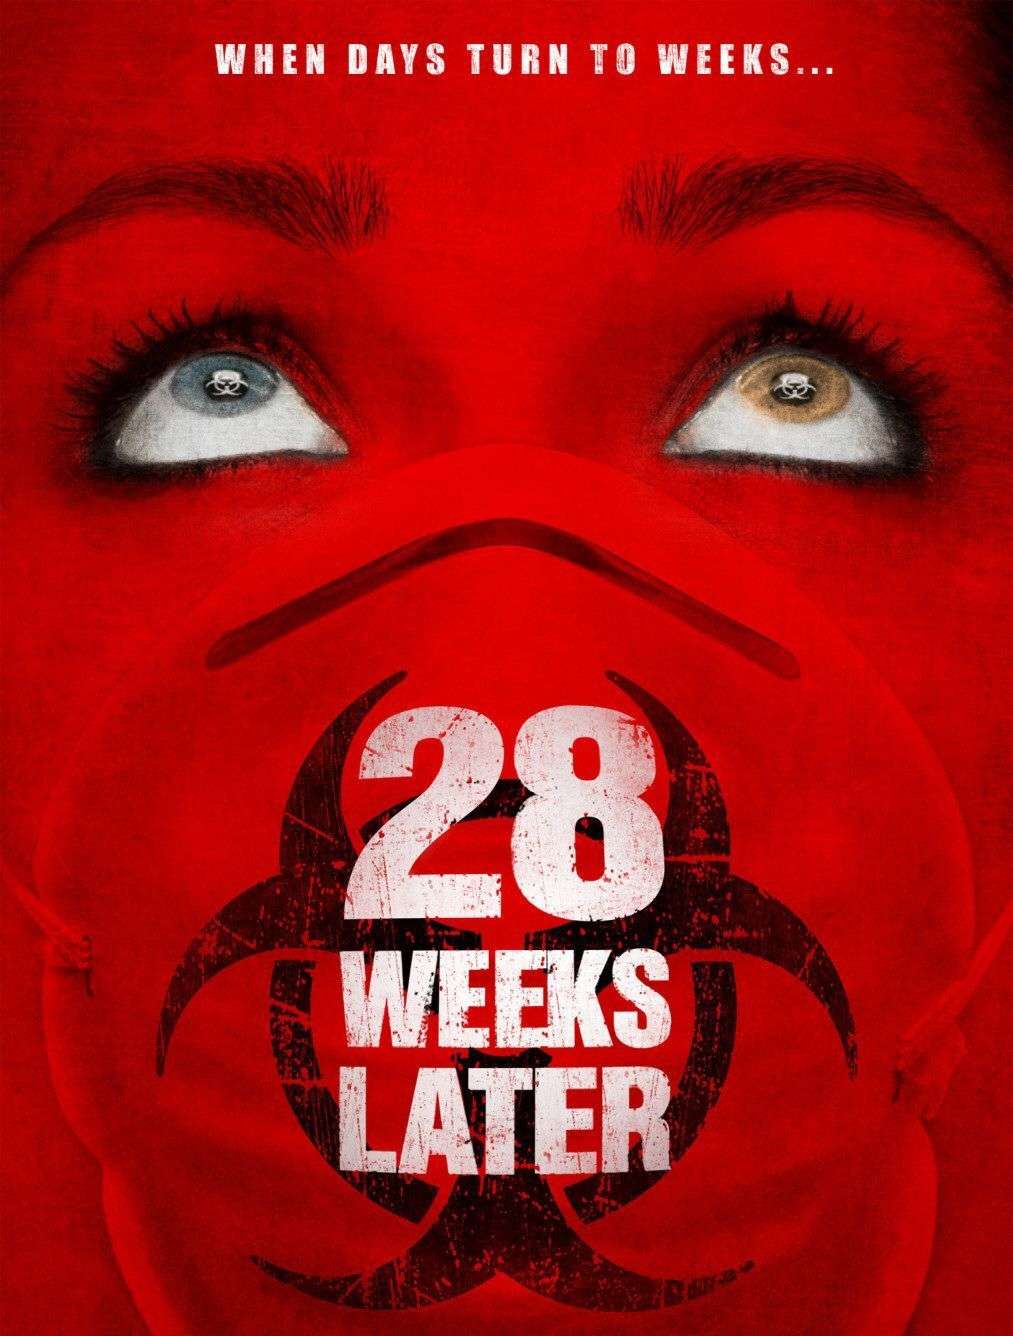 28 Weeks Later (2007)